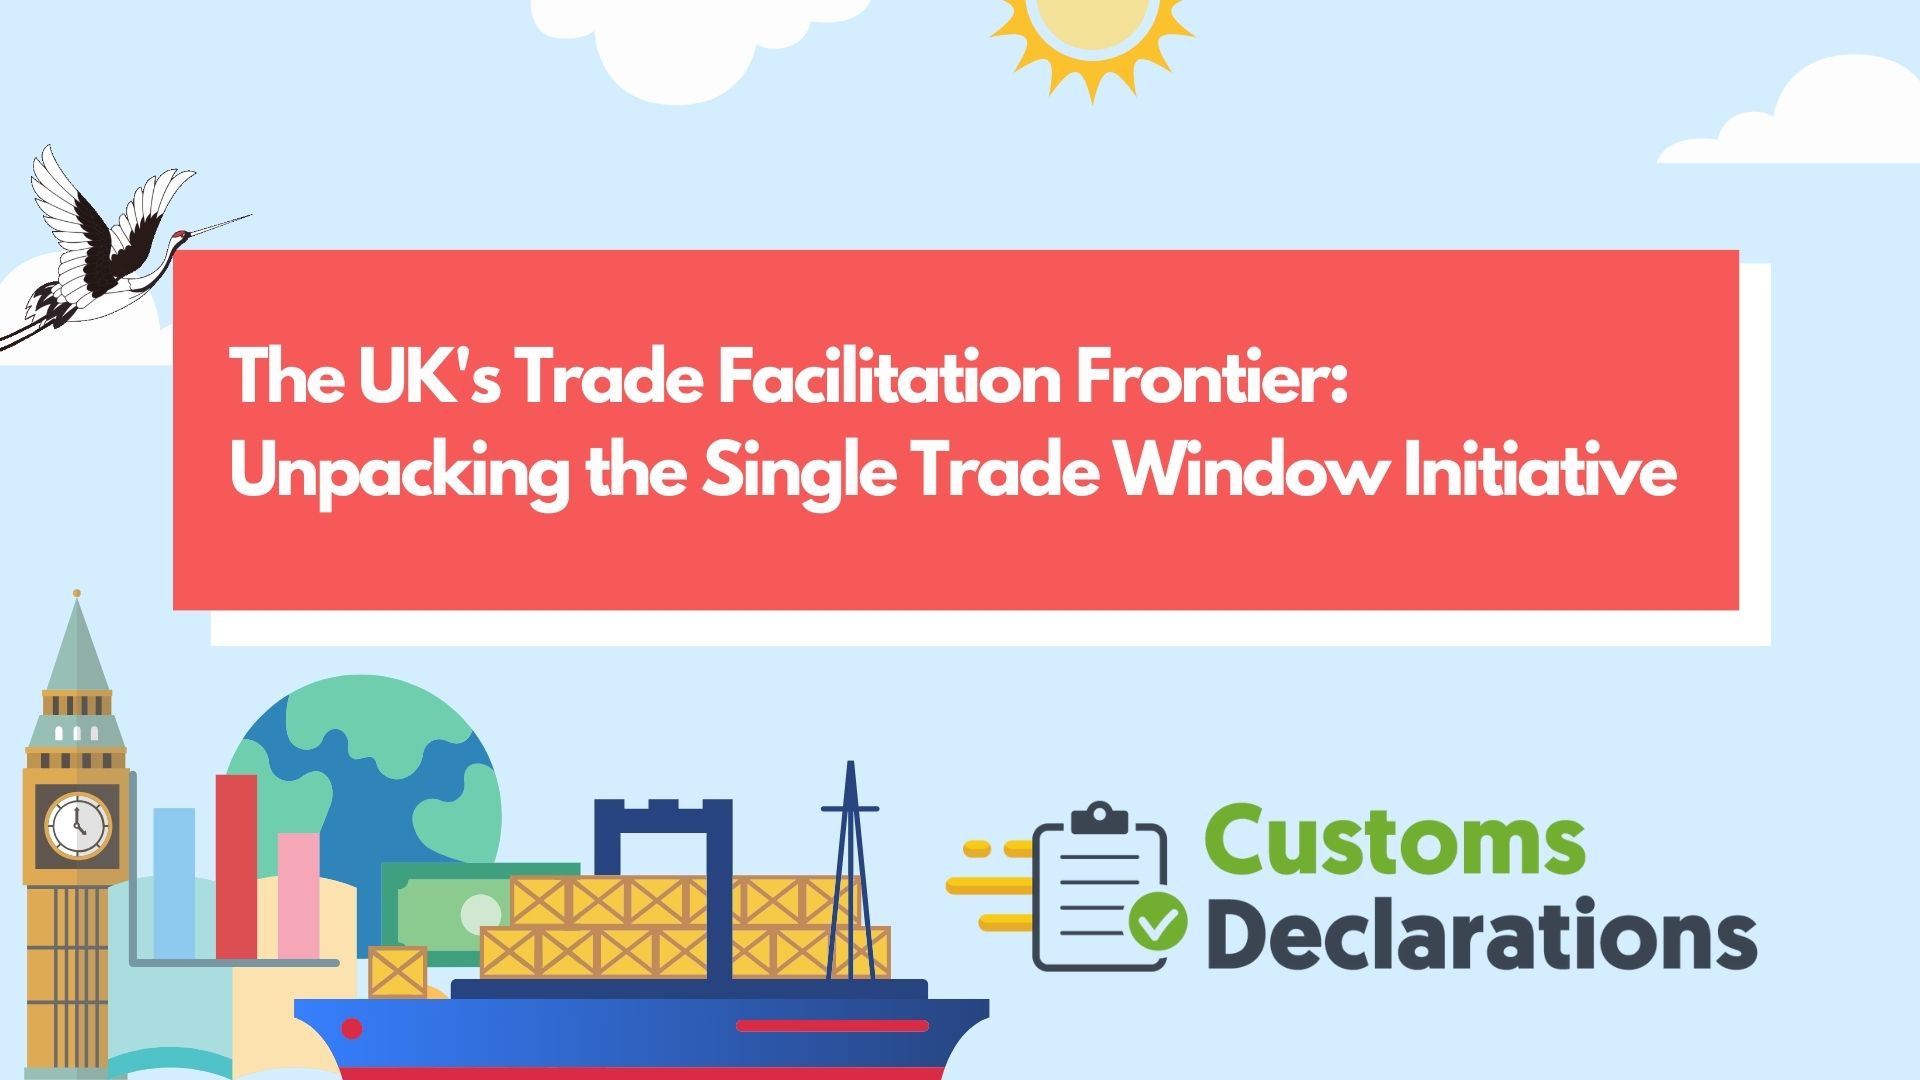 The UK’s Trade Facilitation Frontier: Unpacking the Single Trade Window Initiative